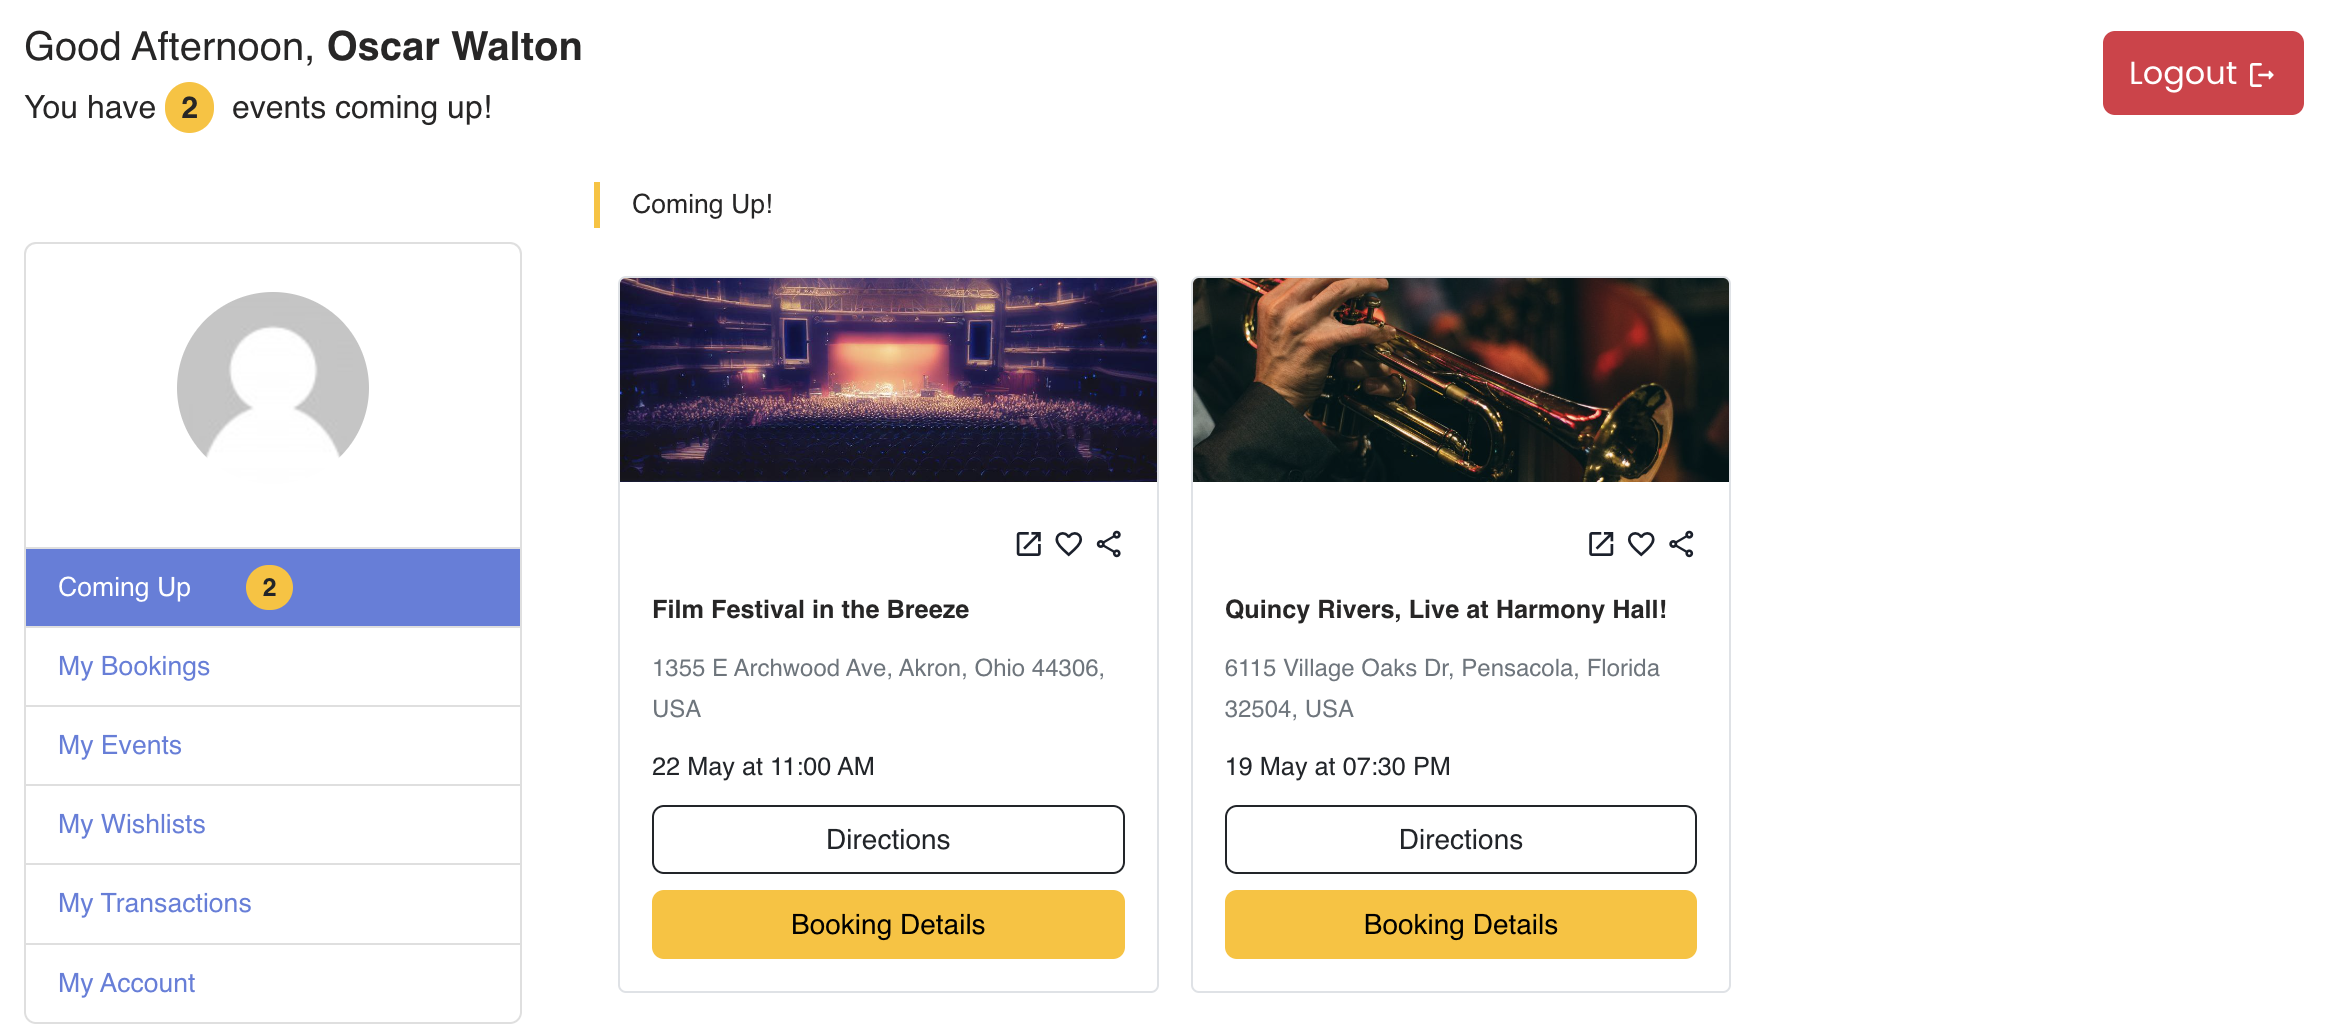 Events Listings (Slider View) - Frontend